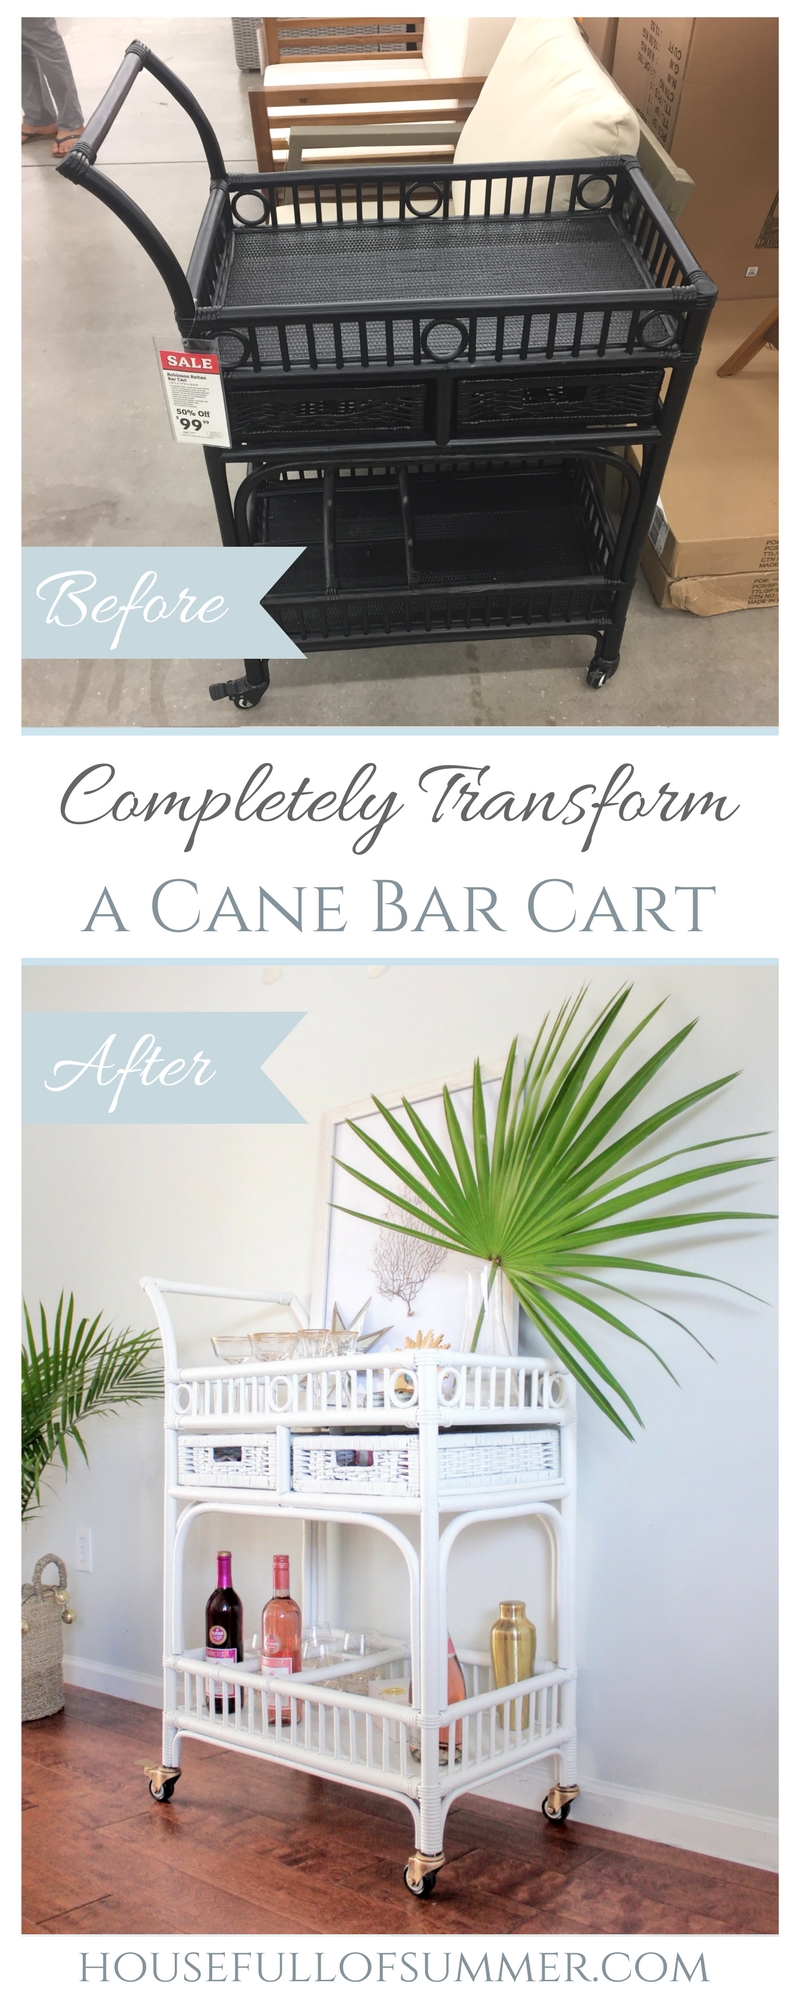 Completely Transform A Cane Bar Cart House Full Of Summer